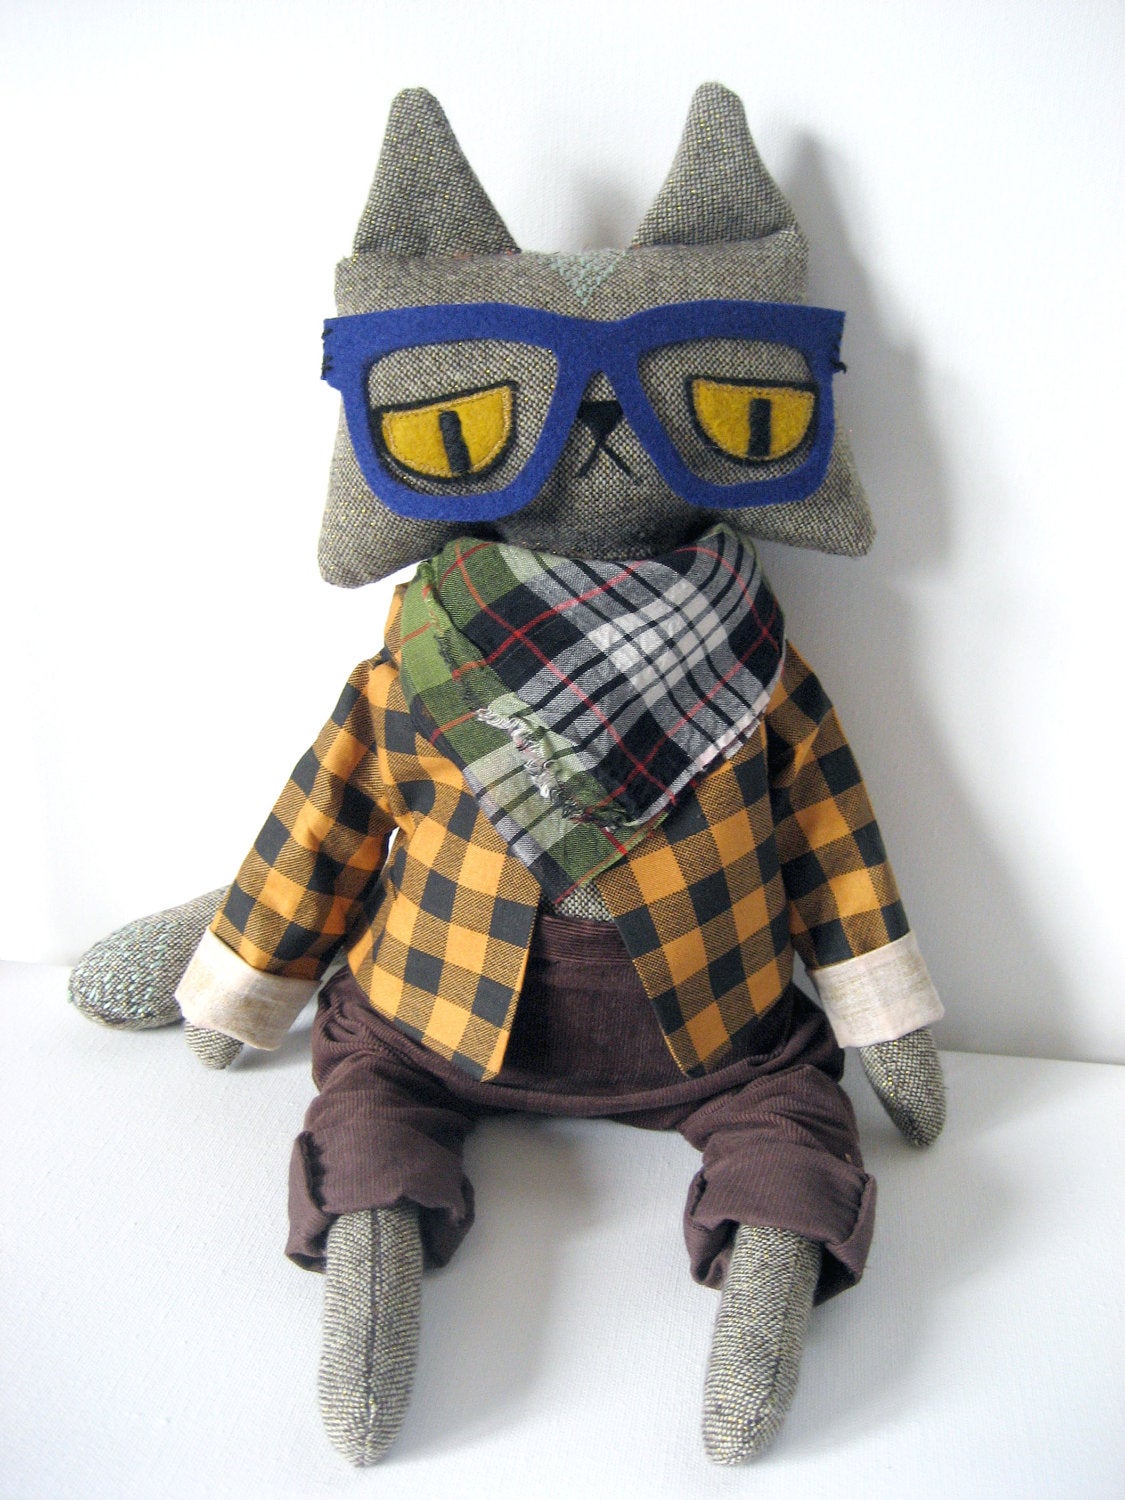 hipster cat wallpaper,stuffed toy,toy,pattern,design,textile